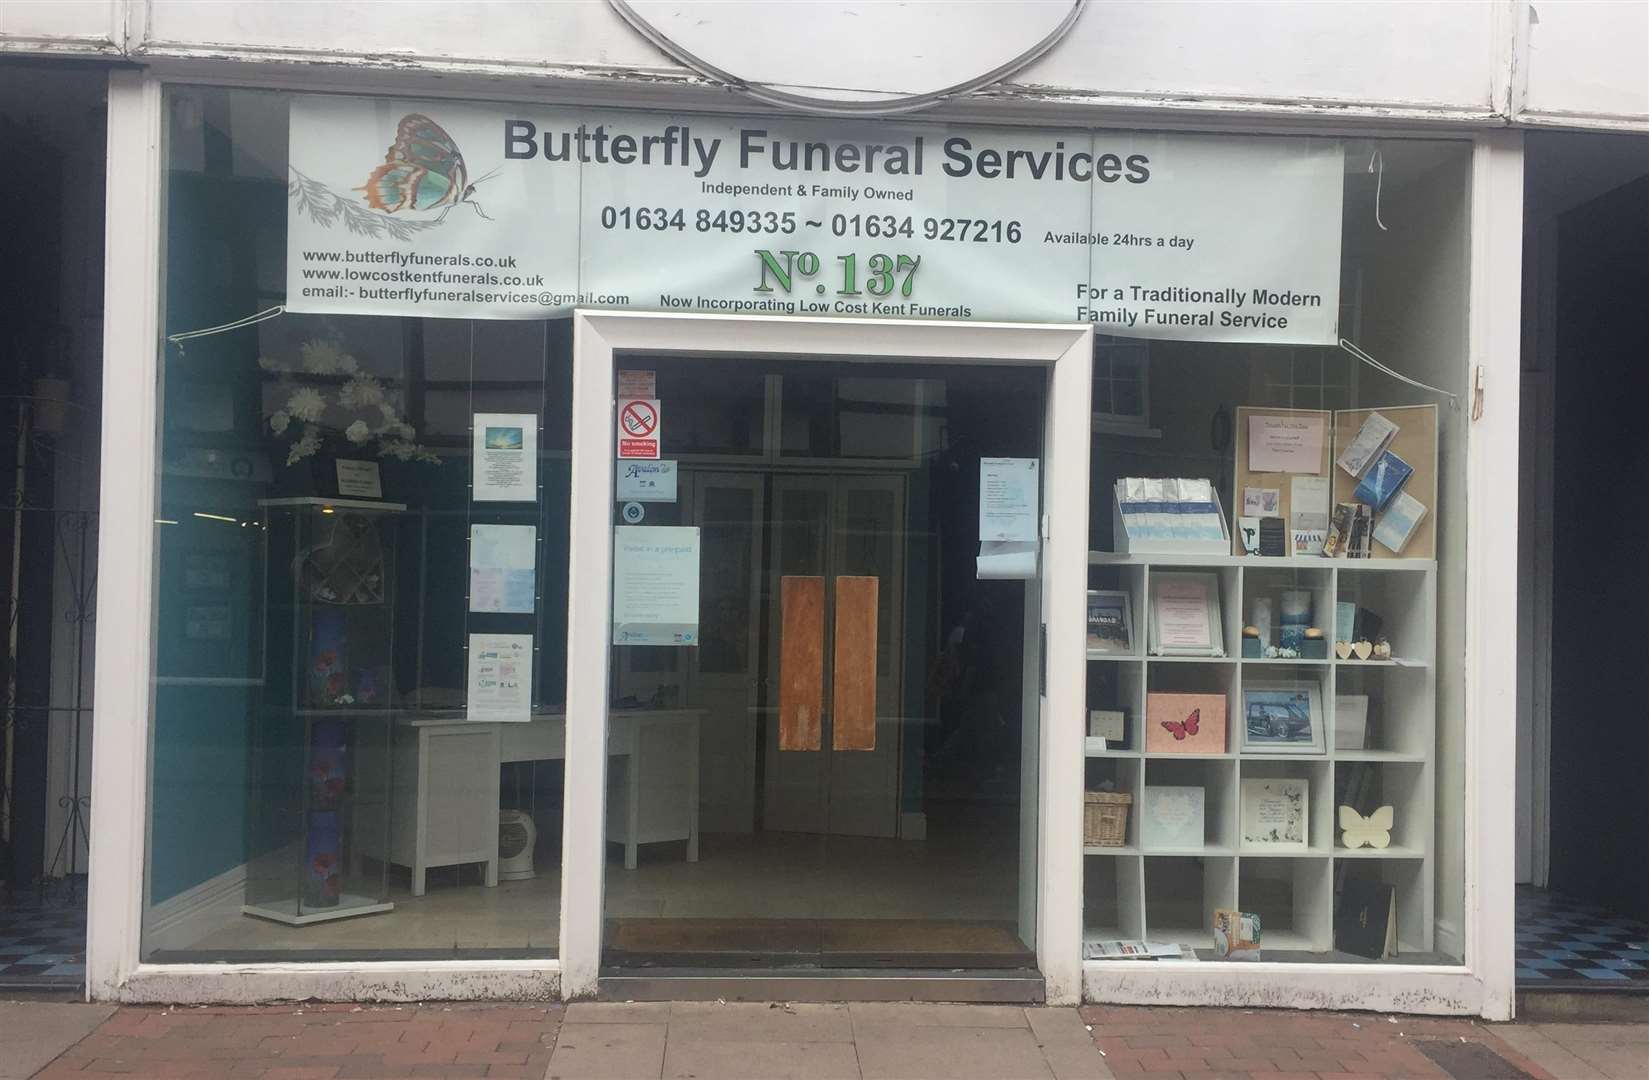 The now closed premises of Butterfly Funeral Services in Rochester High Street